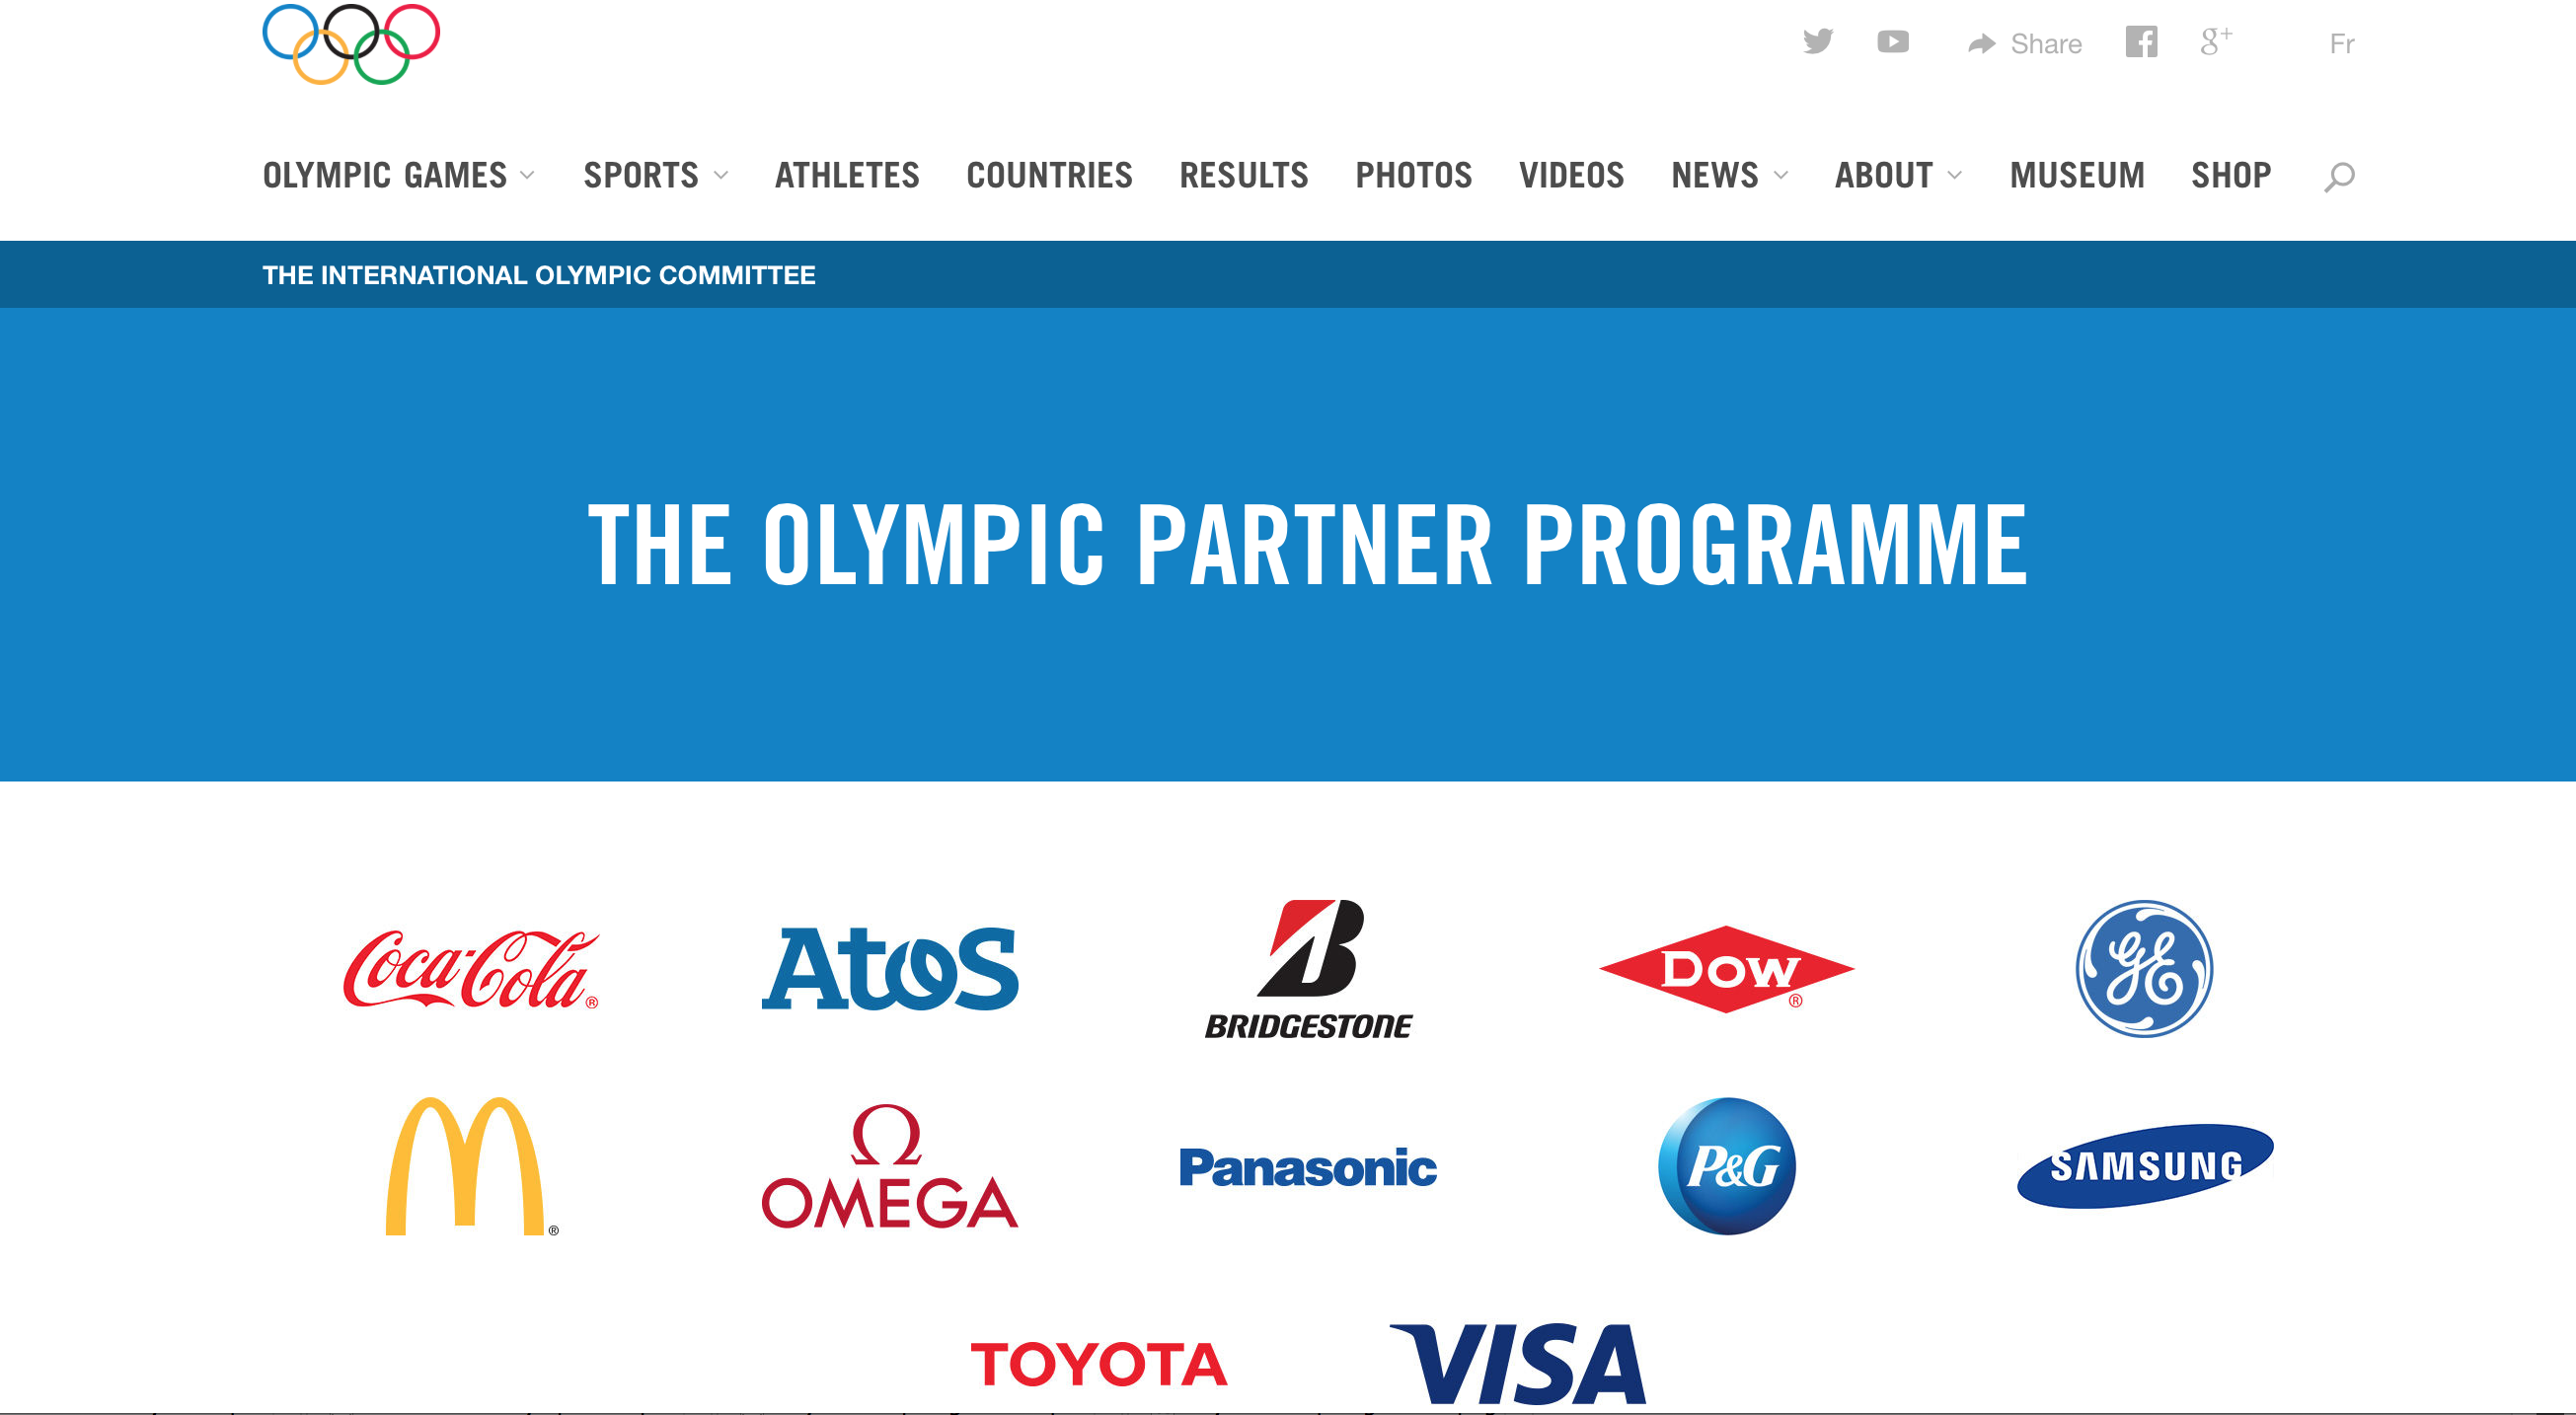 Sponsorship, branding and commercialization of 2016 Rio